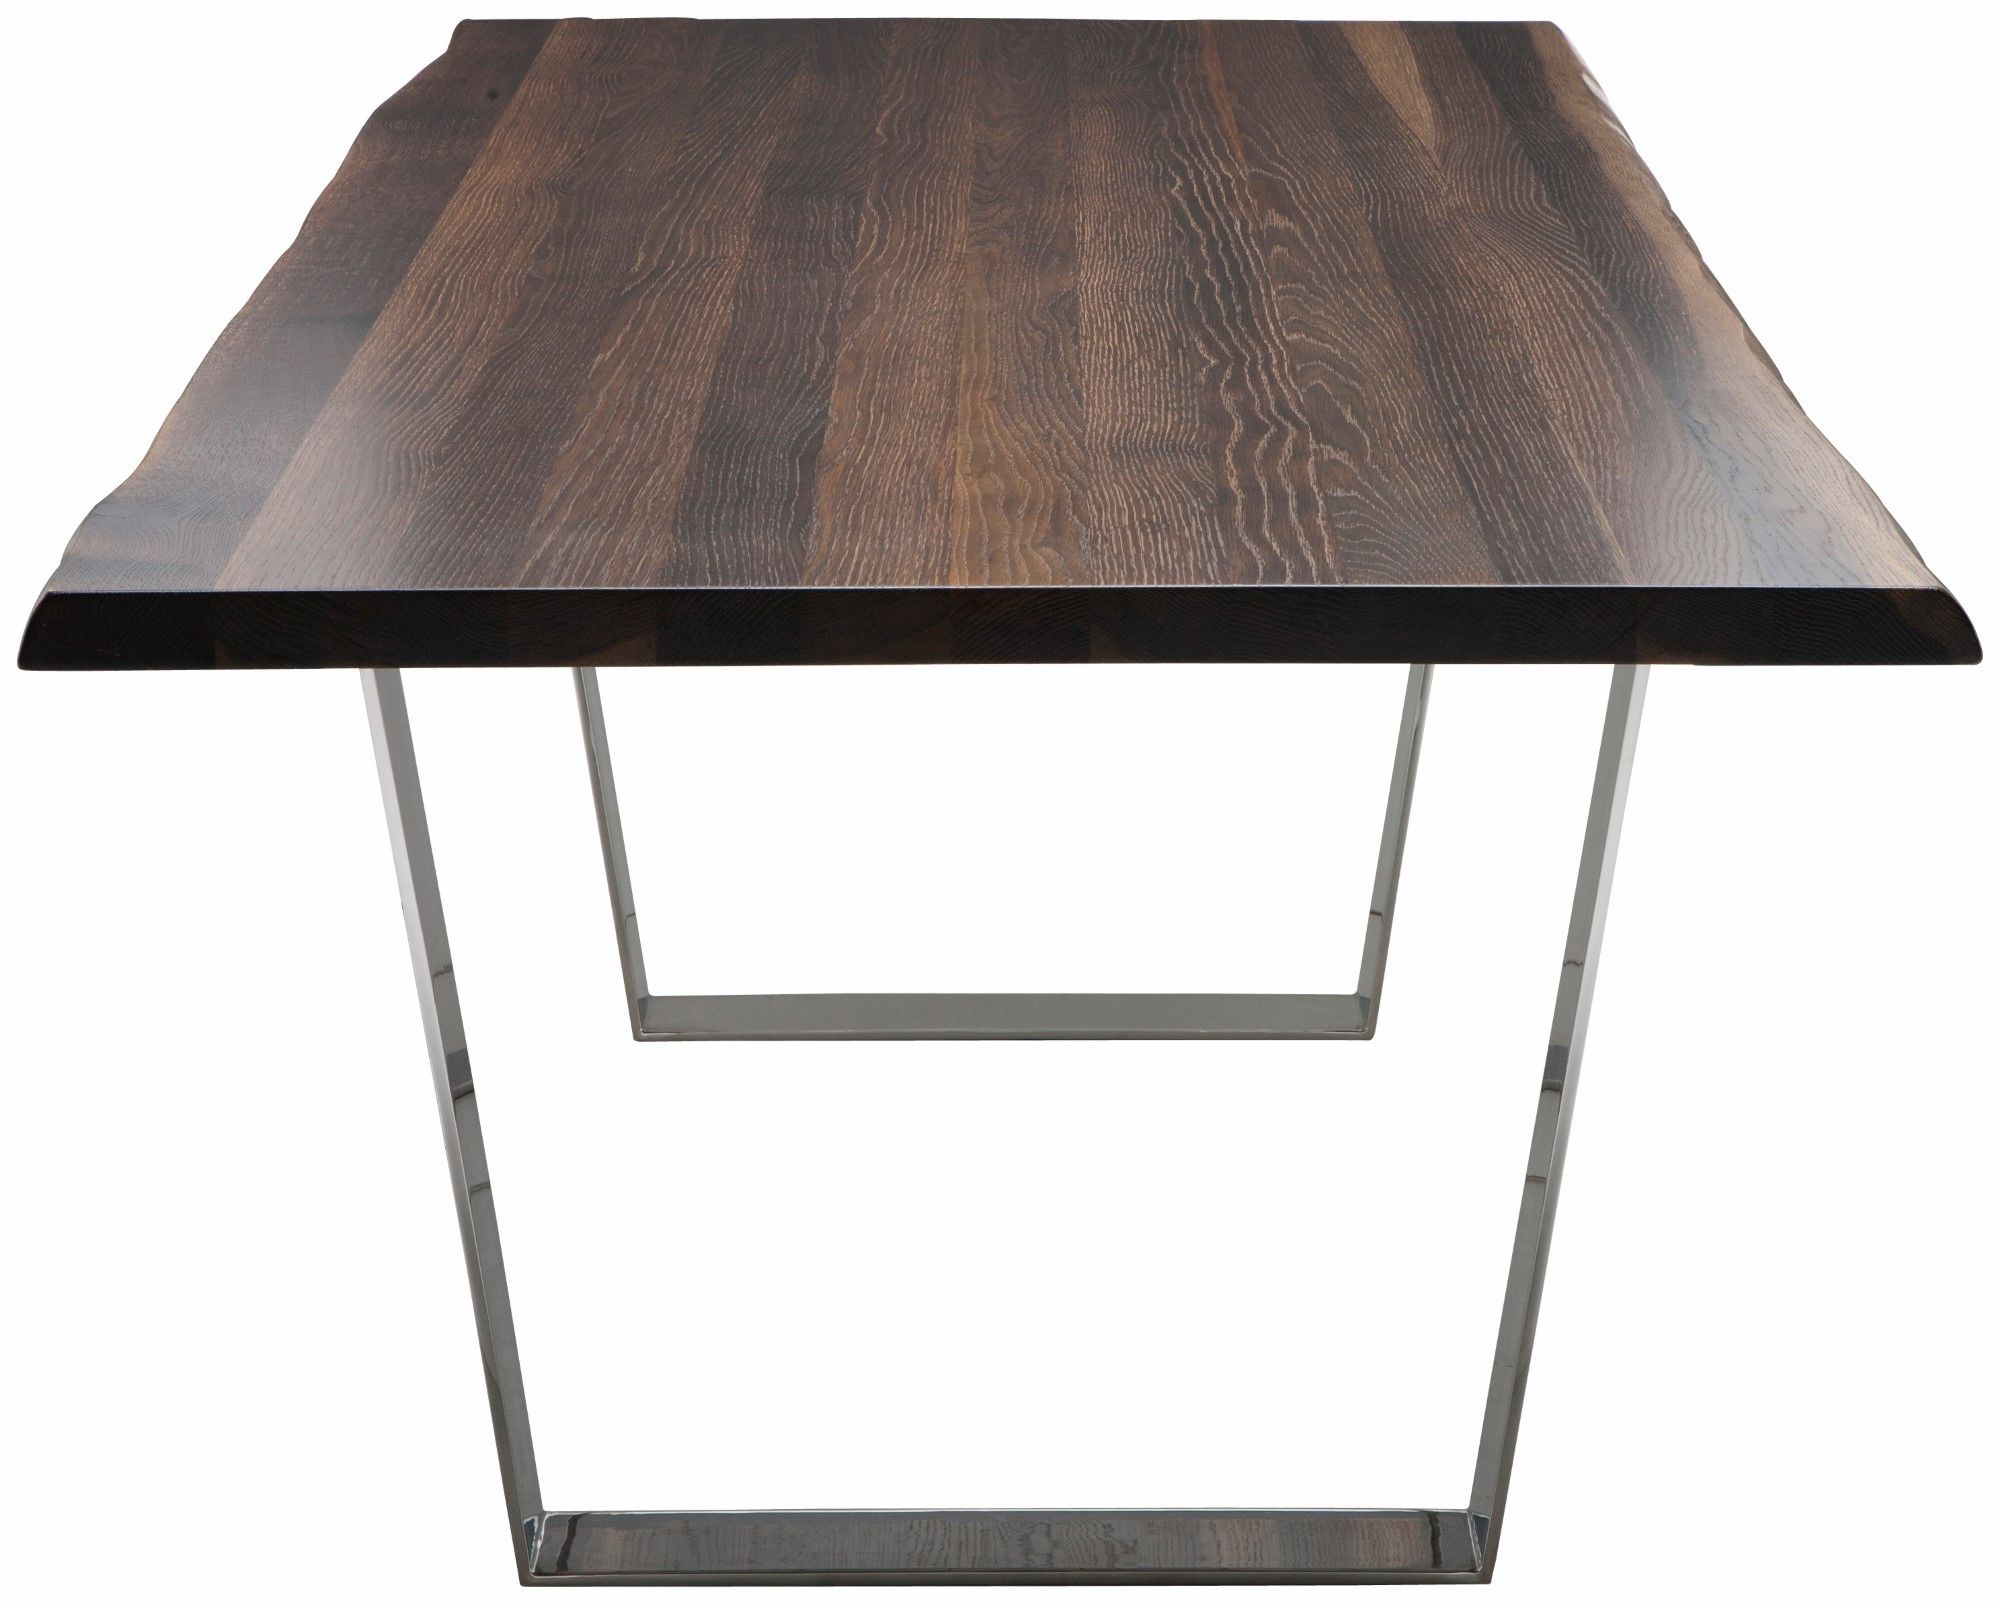 Fashionable Dining Tables In Seared Oak For Versailles Dining Table (short – Seared Oak With Silver Legs) (View 4 of 30)